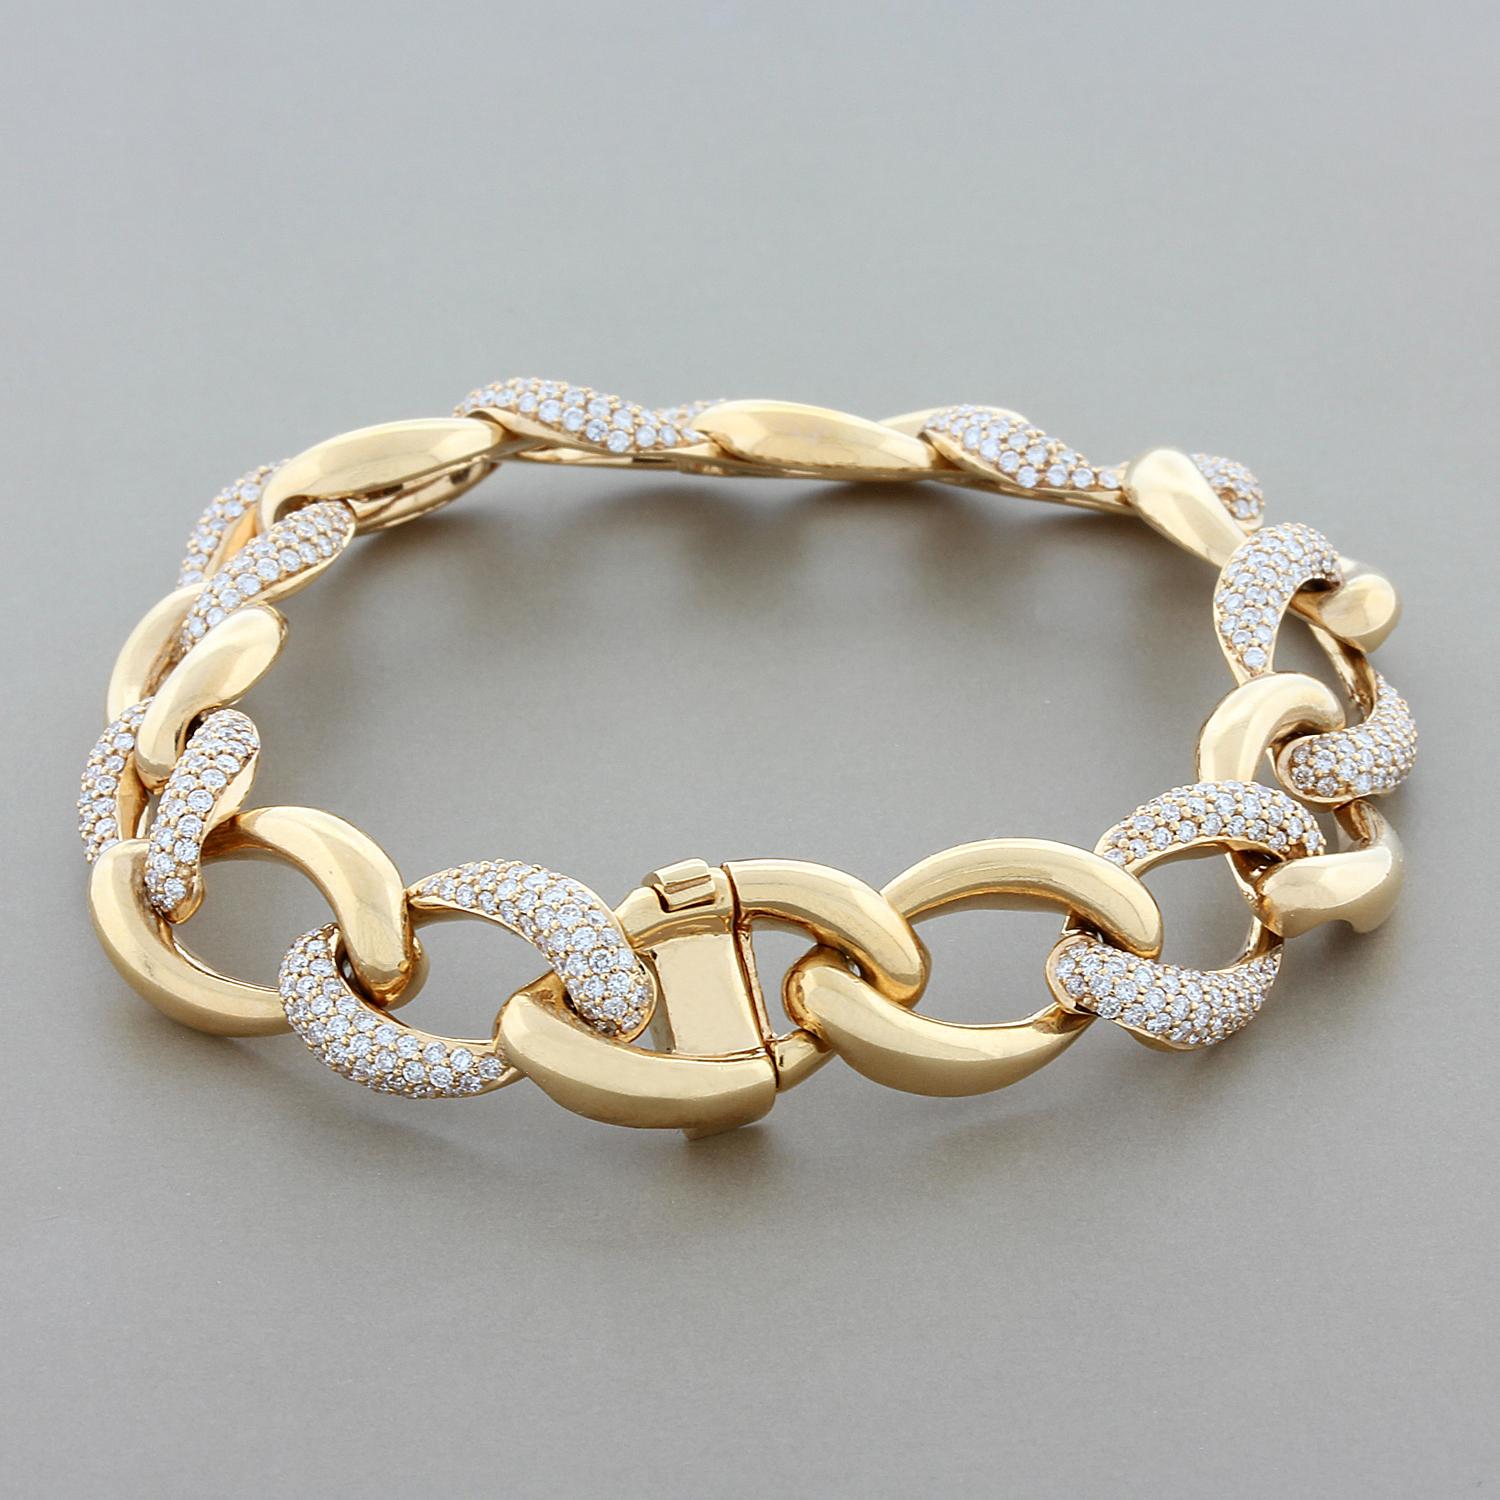 A strong and feminine rose gold link bracelet with diamond pave, VS clarity and F-G color. The diamonds weigh 3.54 carats. The bracelet has 14 links with diamond pave on every other link. Made in 18K rose gold.

Bracelet Length: 7.25 inches
Bracelet